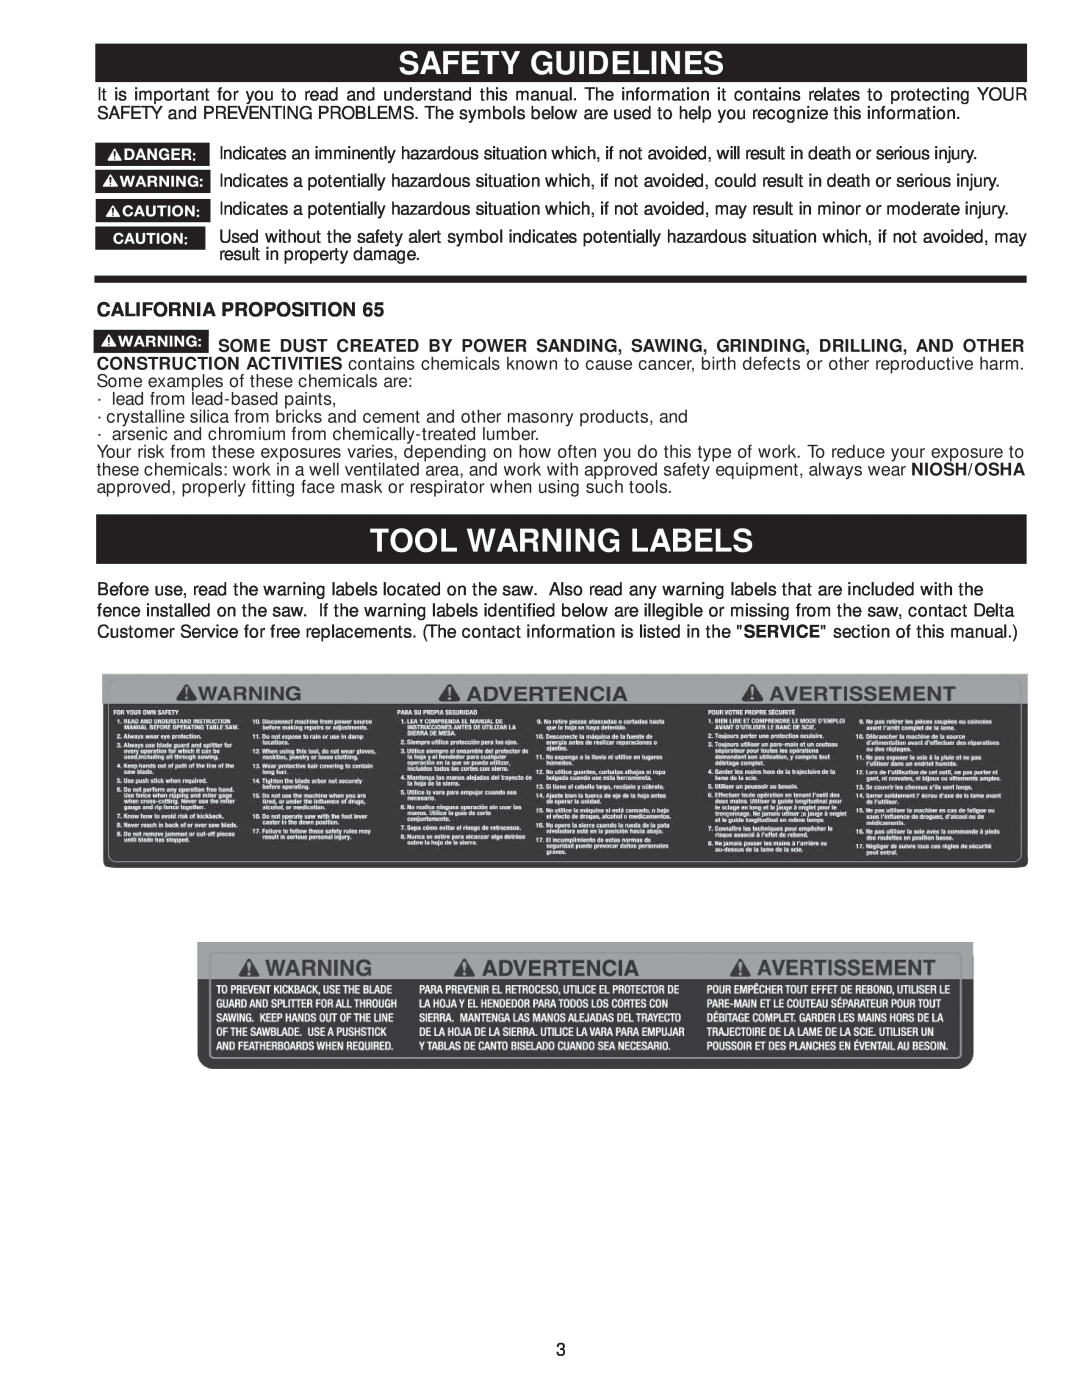 Delta 36-978, 36-979 instruction manual Safety Guidelines, Tool Warning Labels, California Proposition 